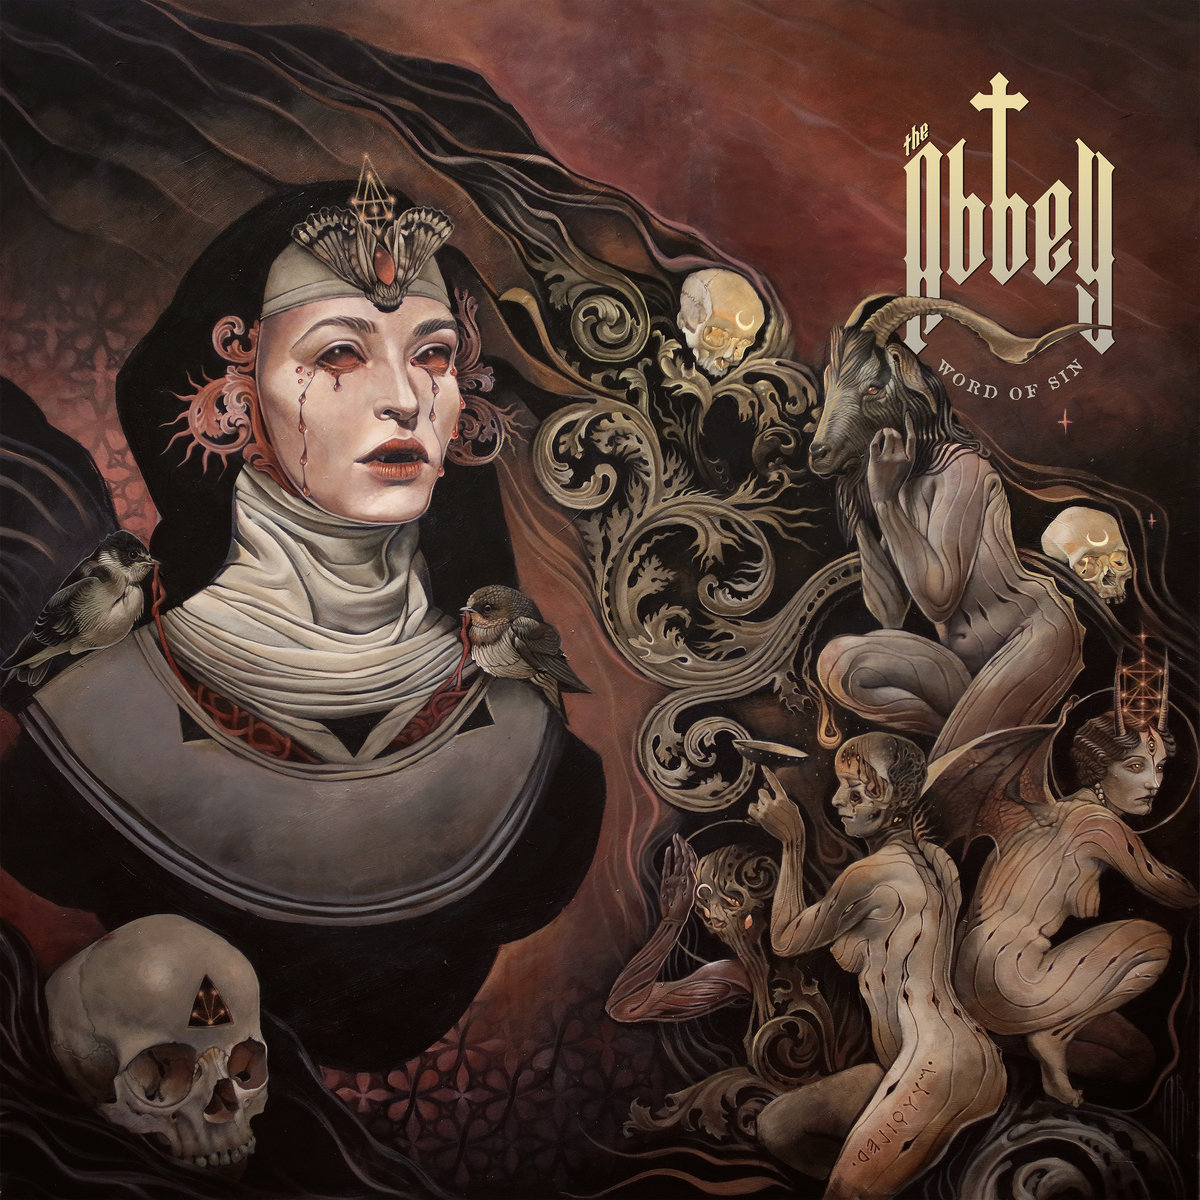 The Abbey cover